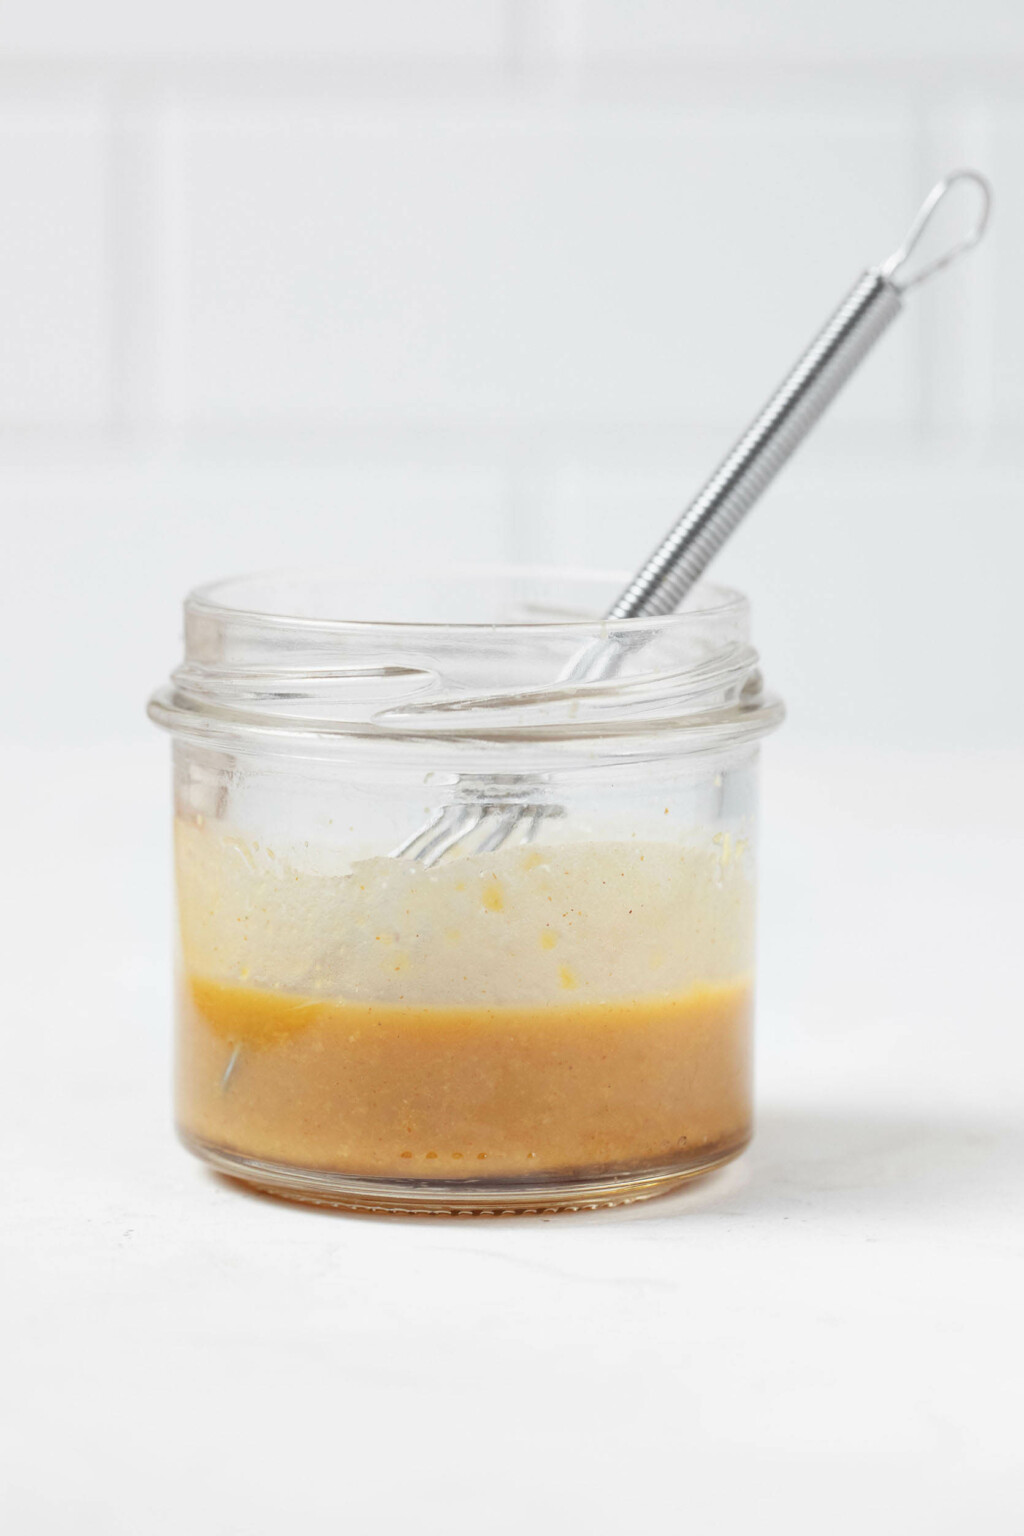 An image of a small mason jar, which is filled with a light-brown colored dressing and a tiny whisk.